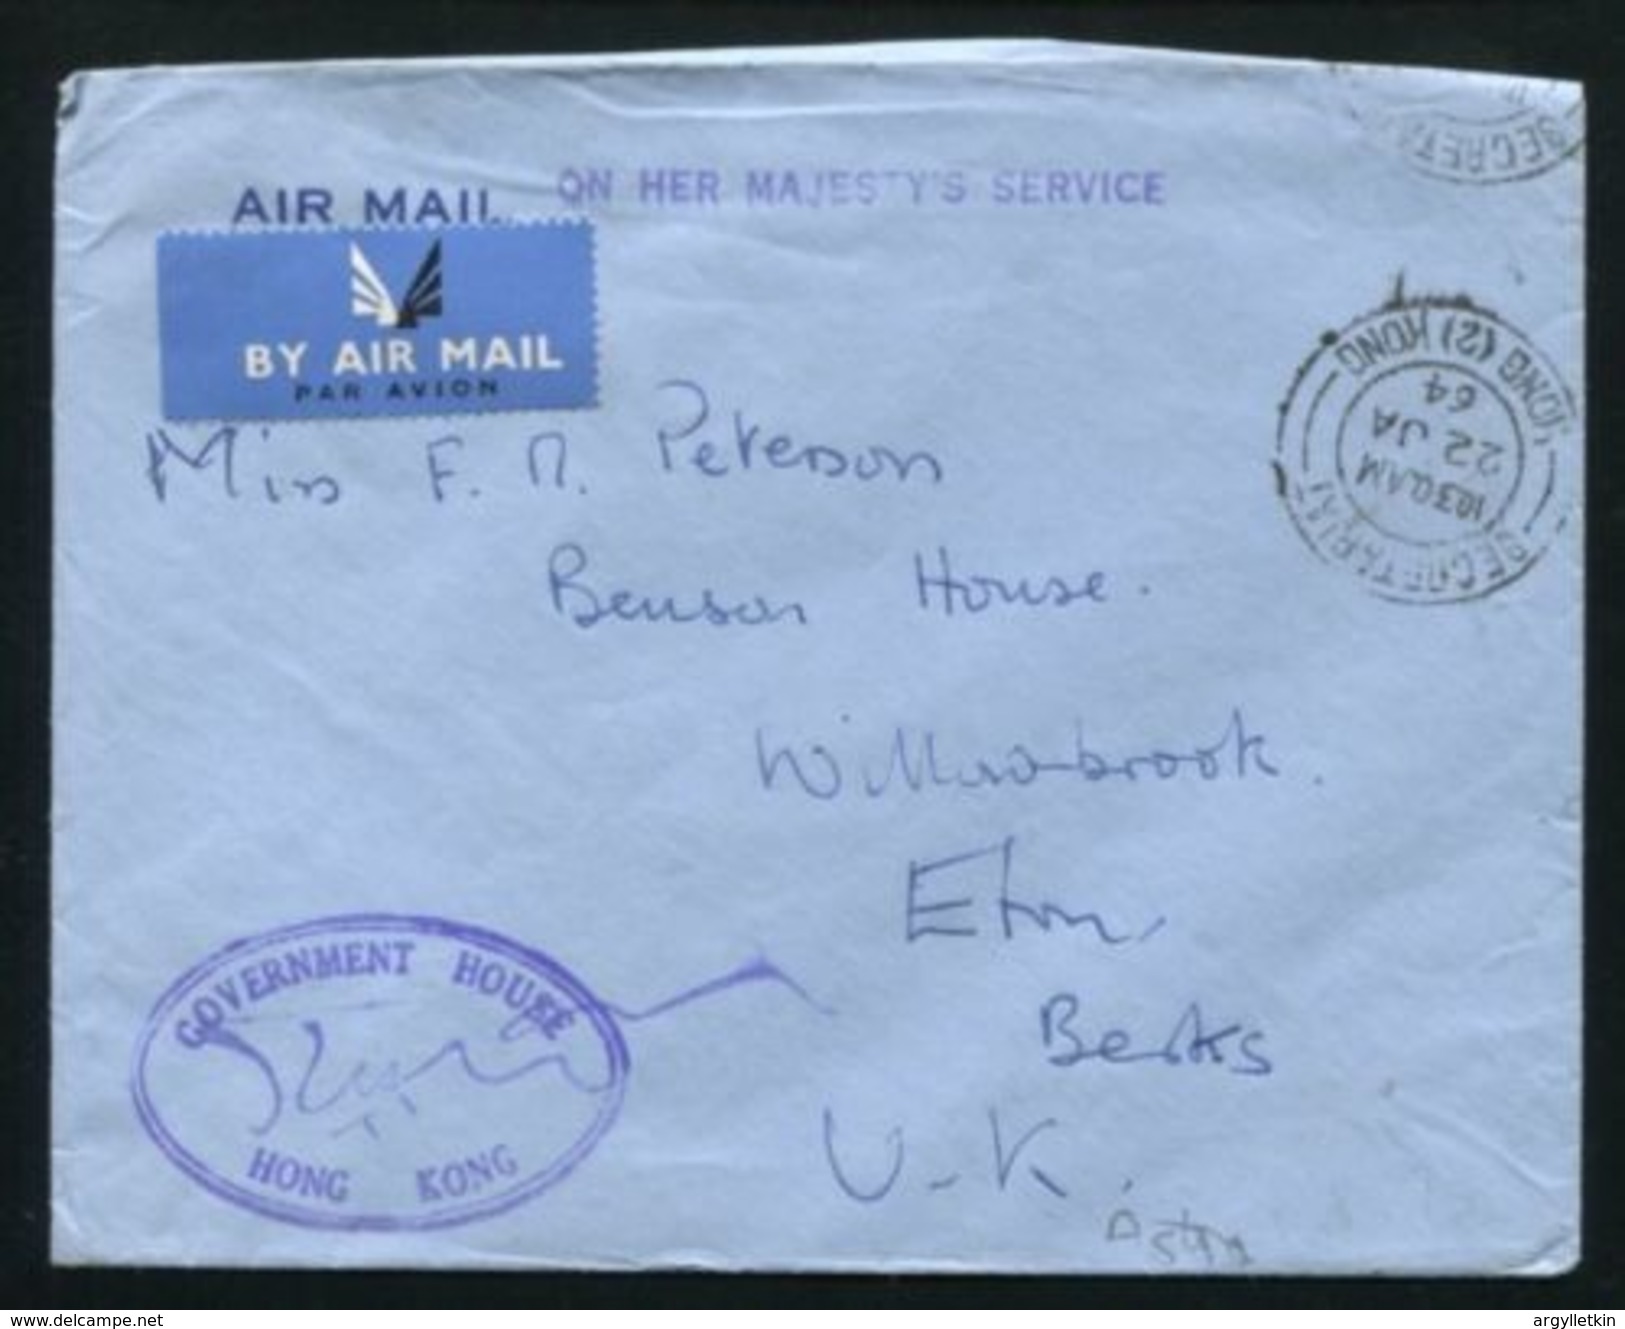 HONG KONG OHMS GOVERNMENT HOUSE ON ASTRA AIRMAIL ENVELOPE 1964 - Covers & Documents